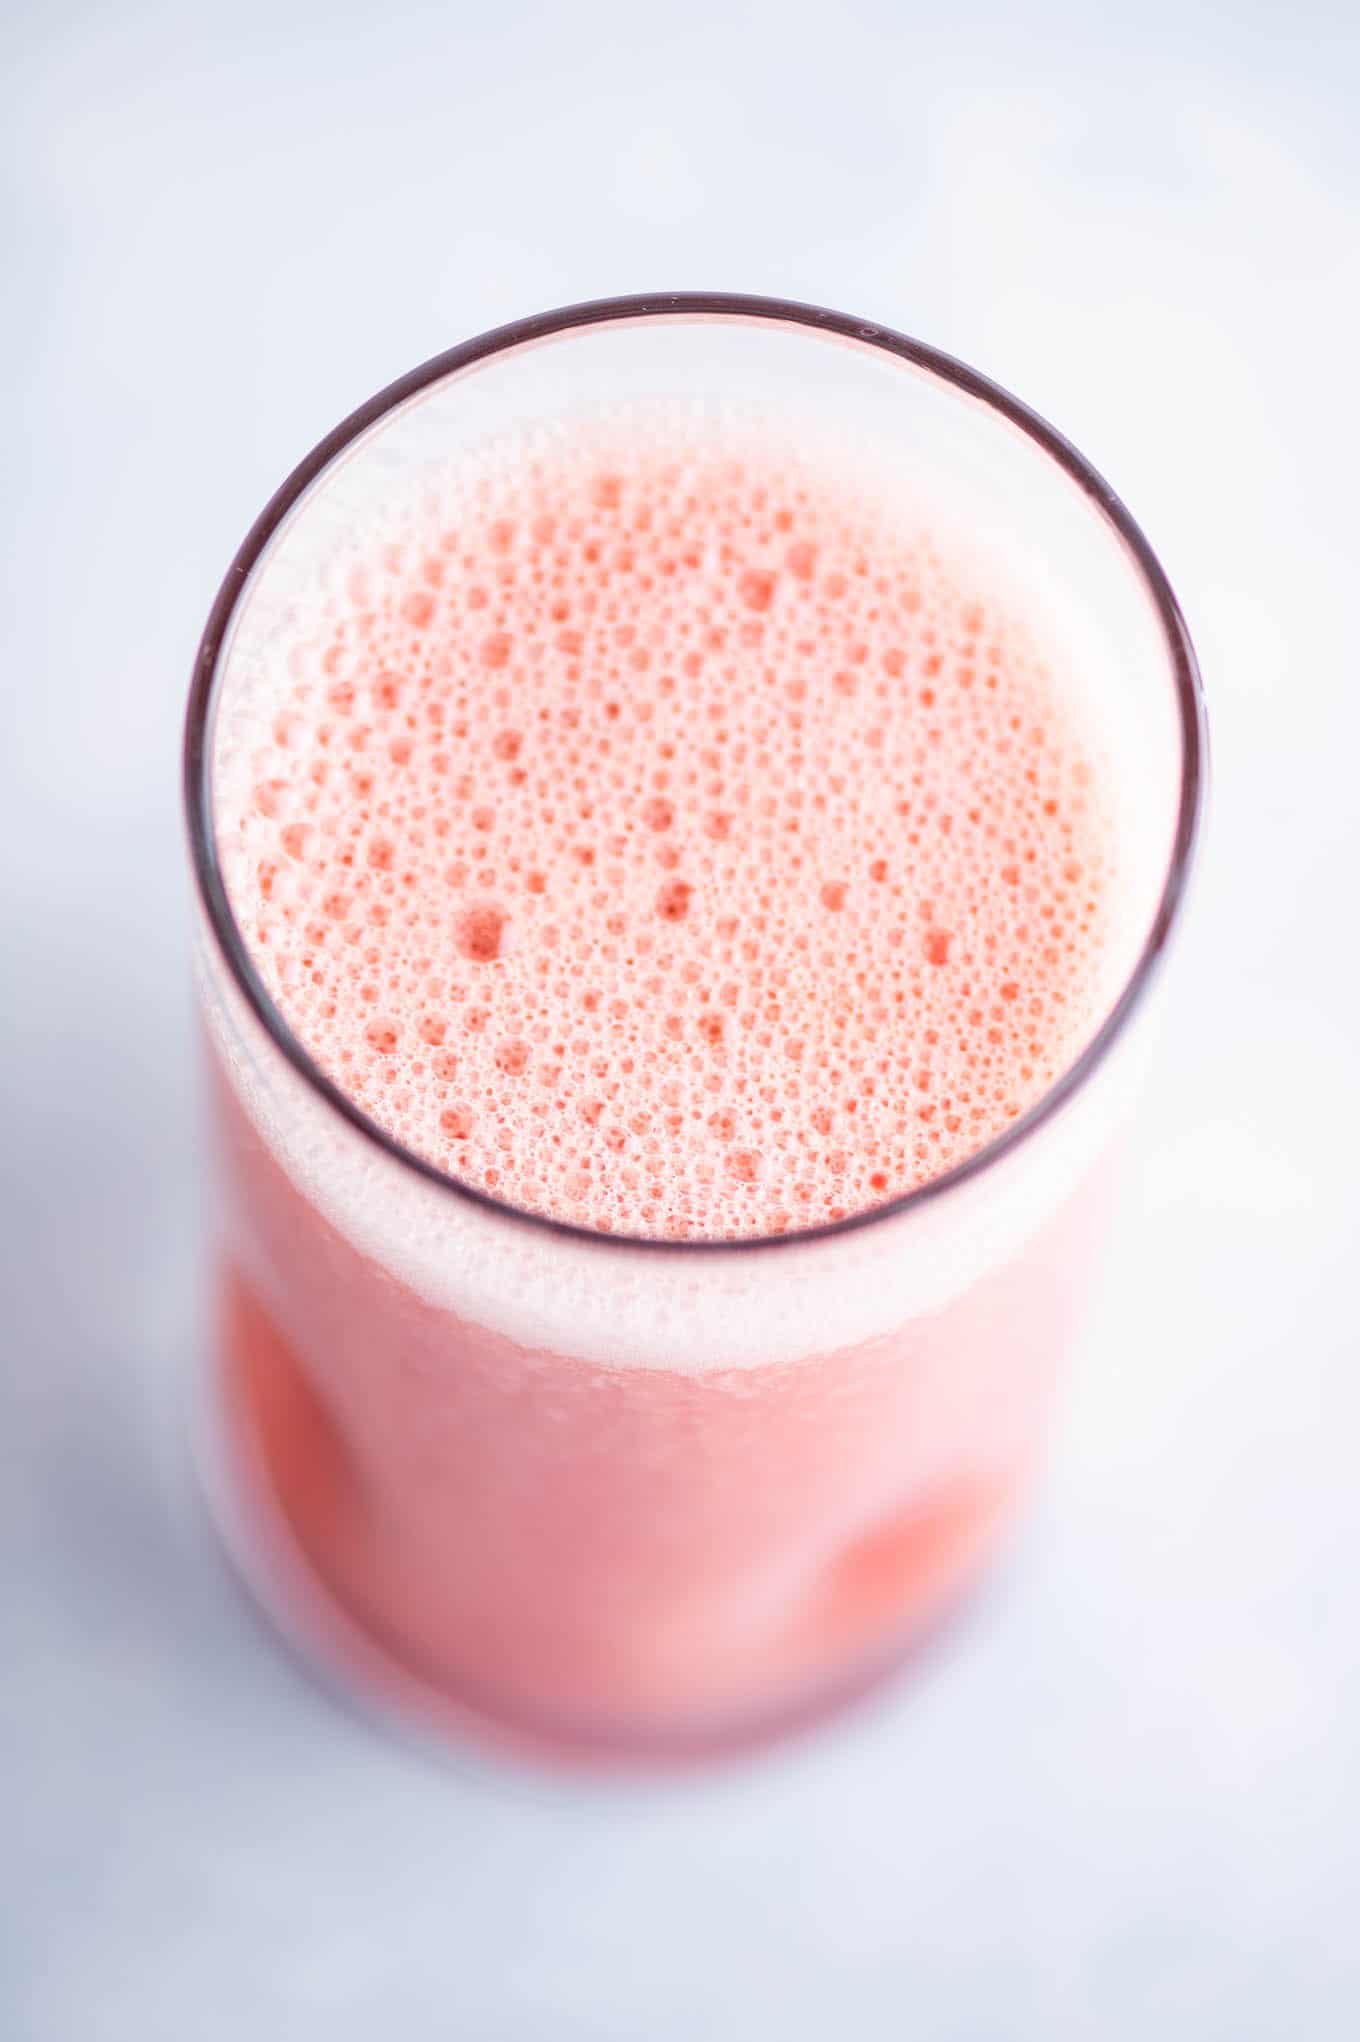 watermelon juice from an overhead view showing bubbles on top